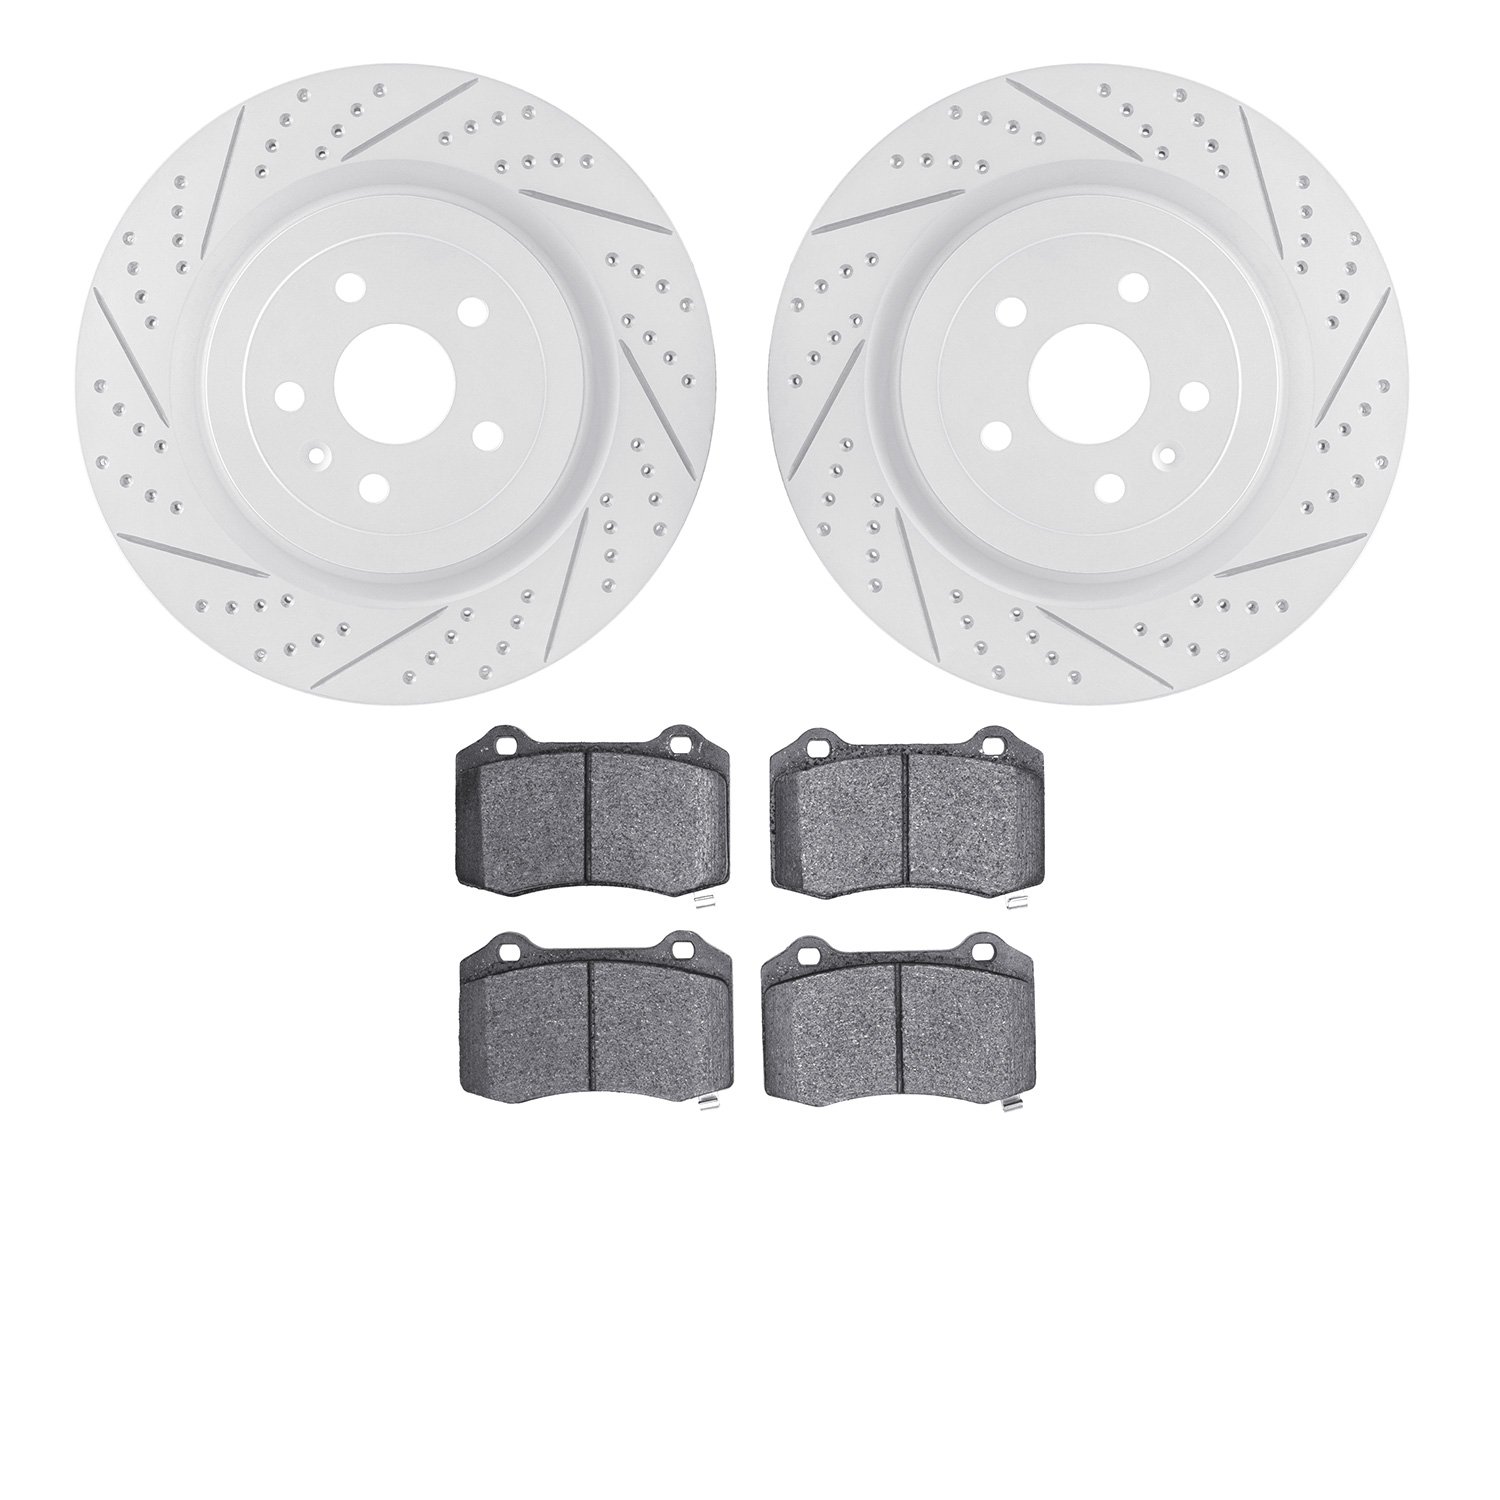 2402-47003 Geoperformance Drilled/Slotted Brake Rotors with Ultimate-Duty Brake Pads Kit, Fits Select GM, Position: Rear